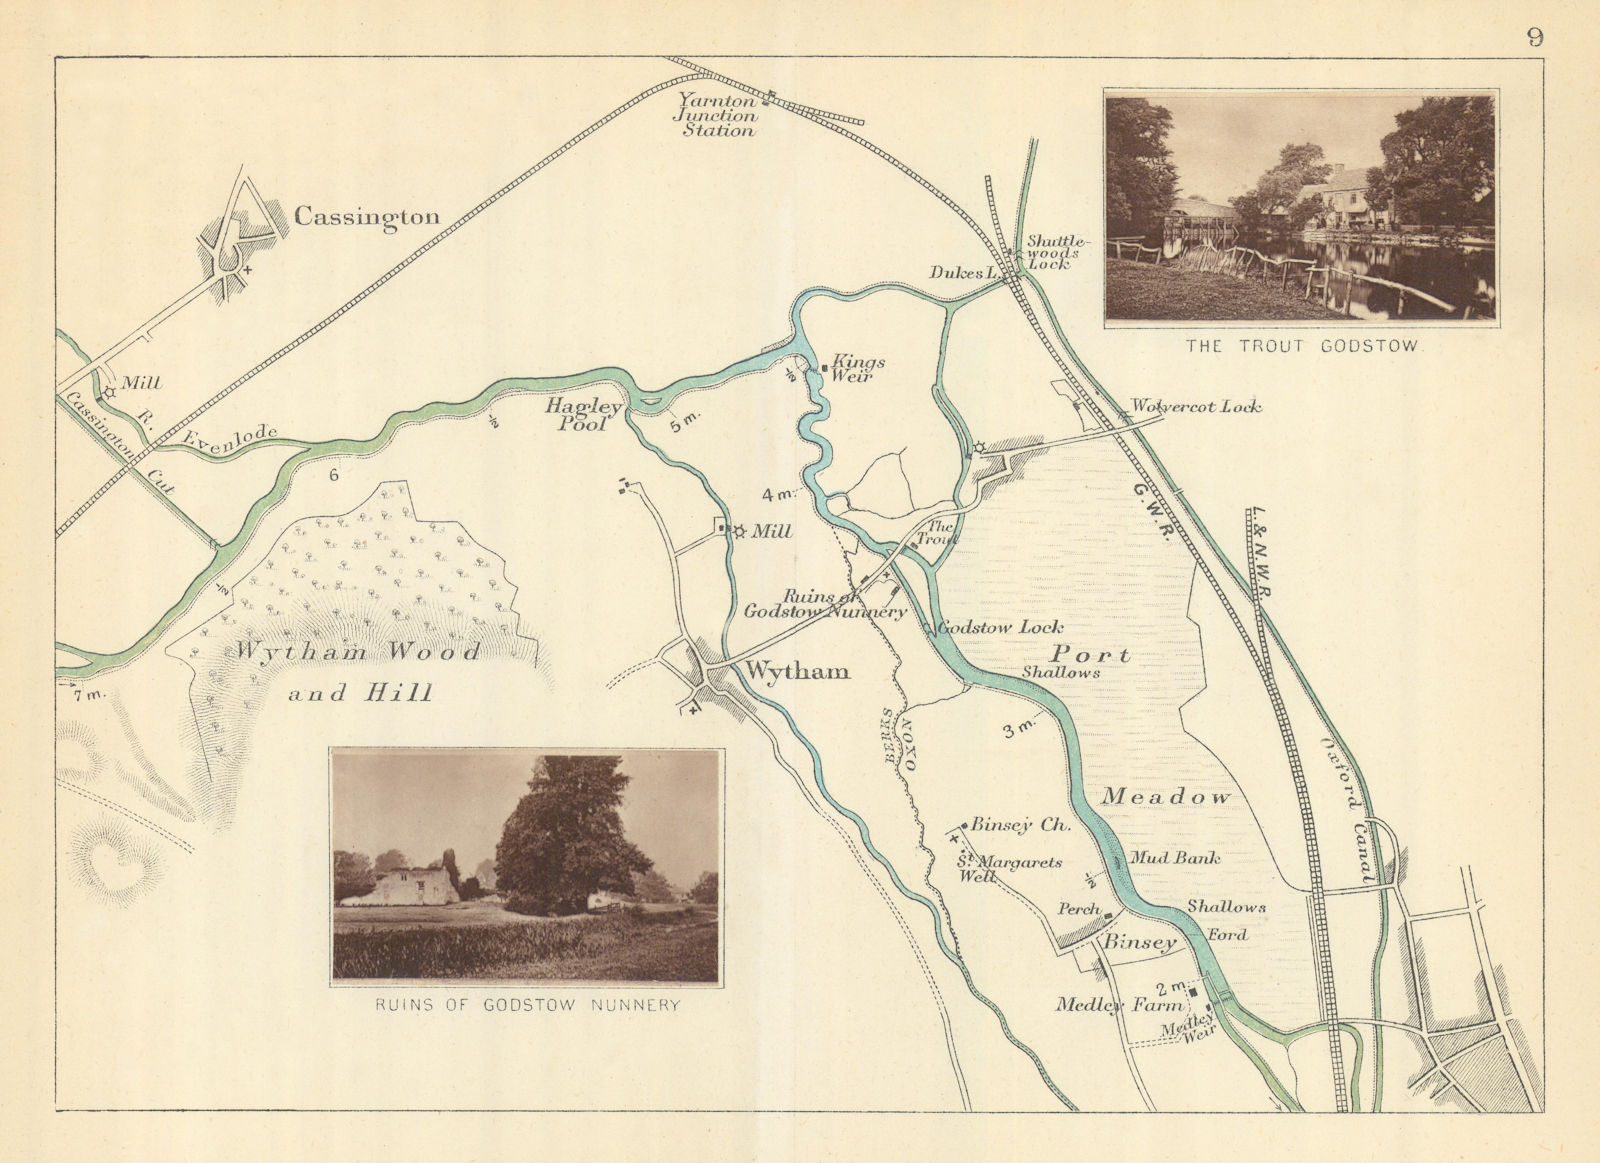 Associate Product RIVER THAMES - Cassington - Wytham - Godstow - Binsey. The Trout. TAUNT 1879 map